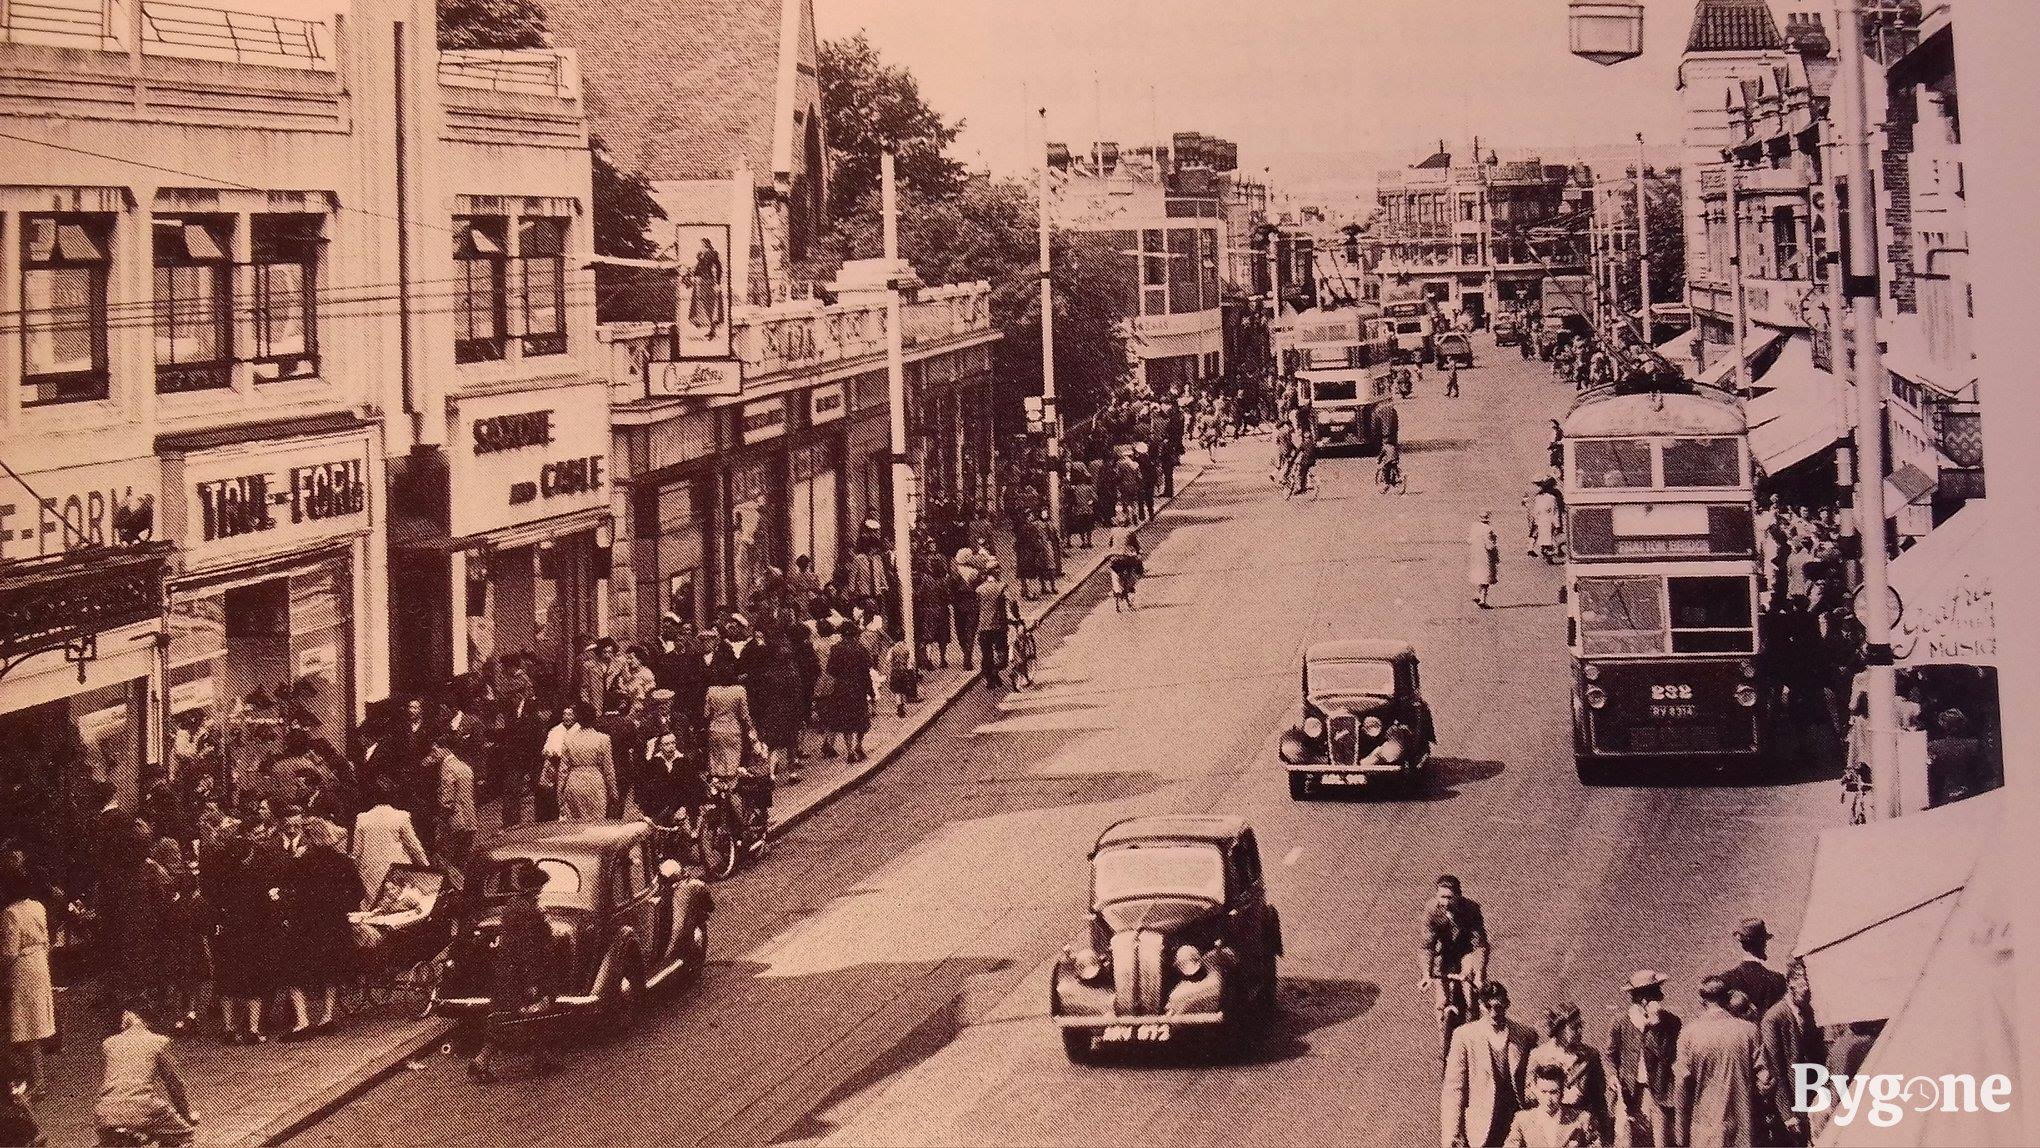 North End, 1940s